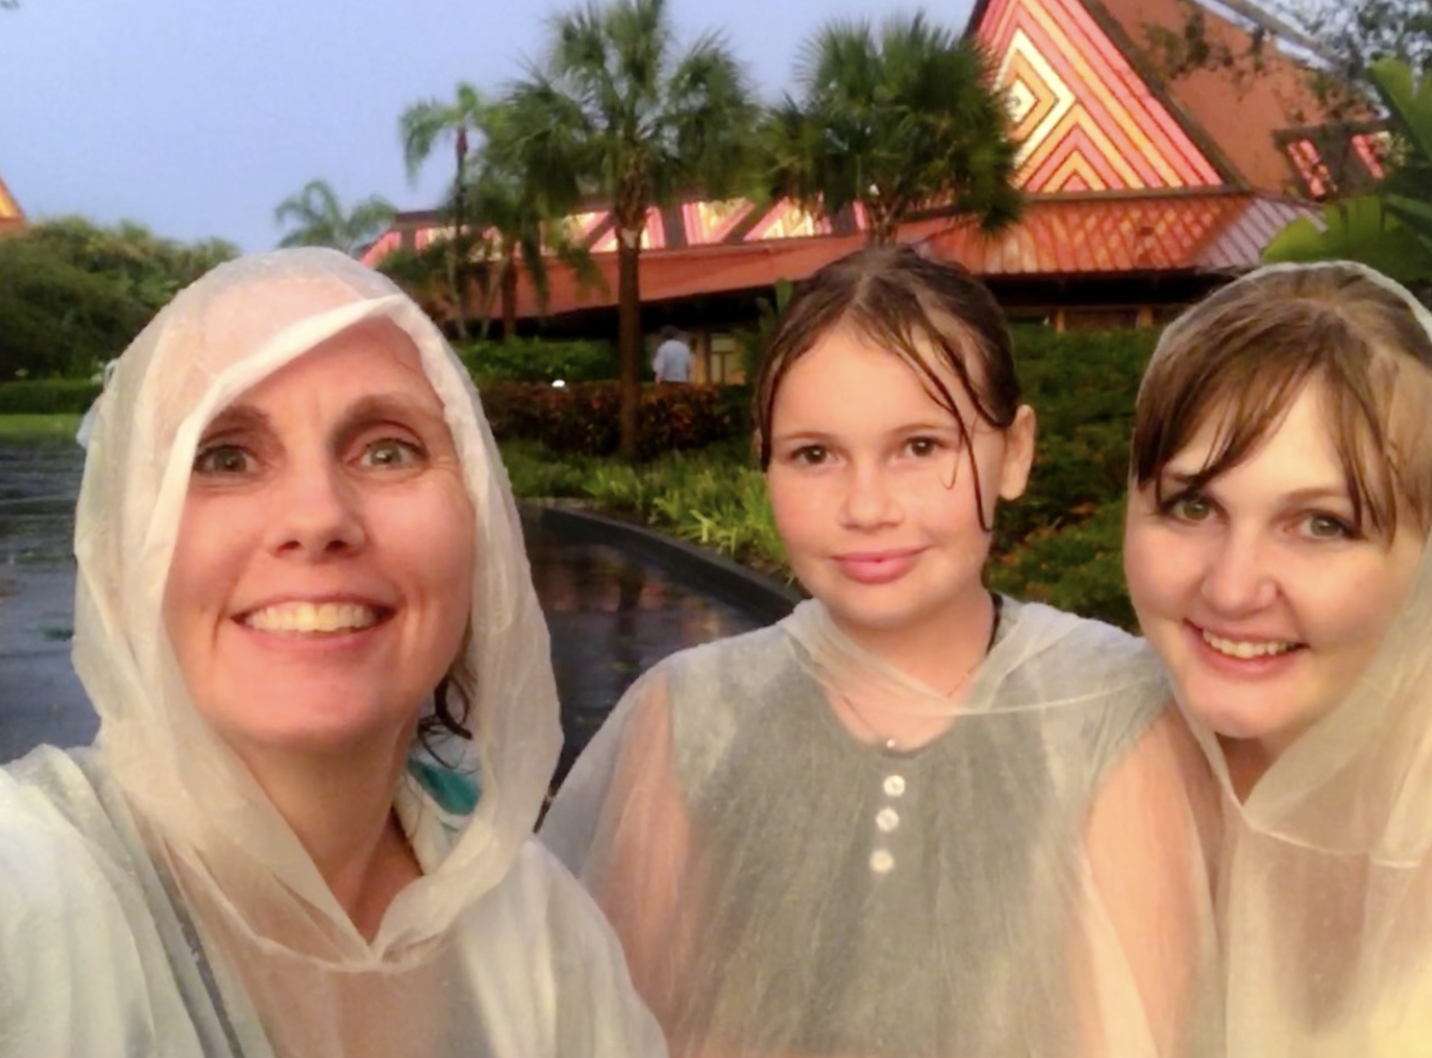 The author taking a rained-on selfie with others